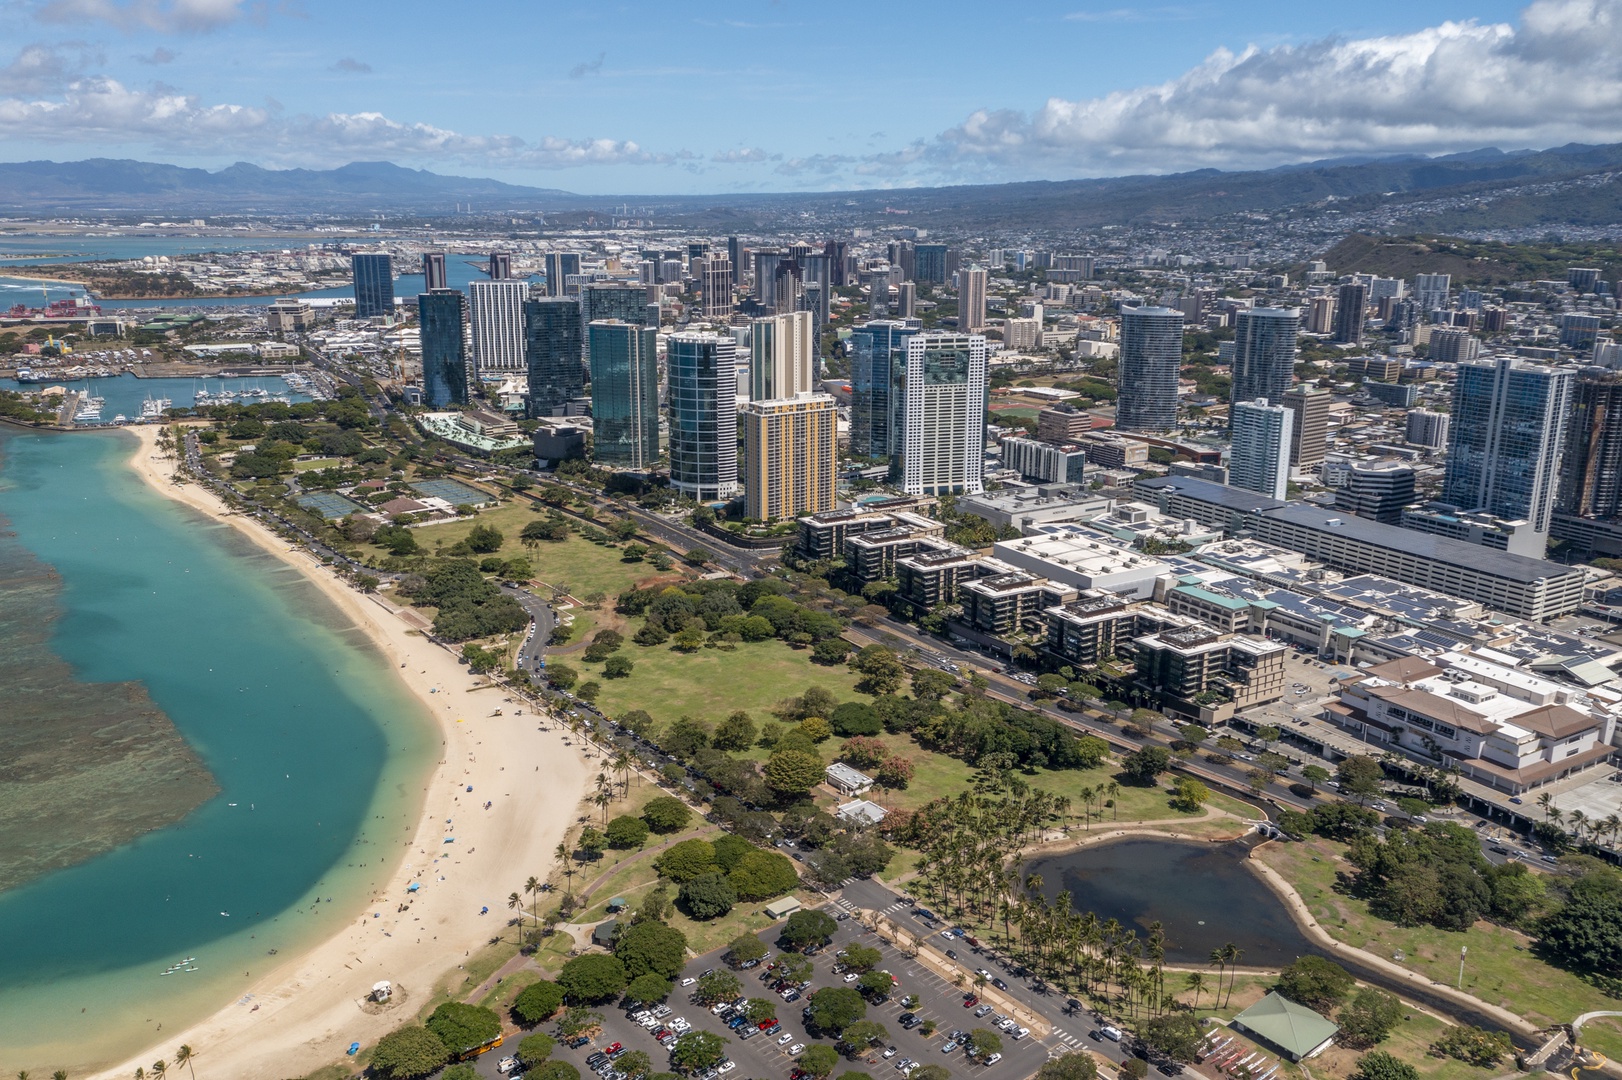 Honolulu Vacation Rentals, Park Lane Sky Resort - The resort is conveniently perched on the oceanside of Ala Moana Shopping Center